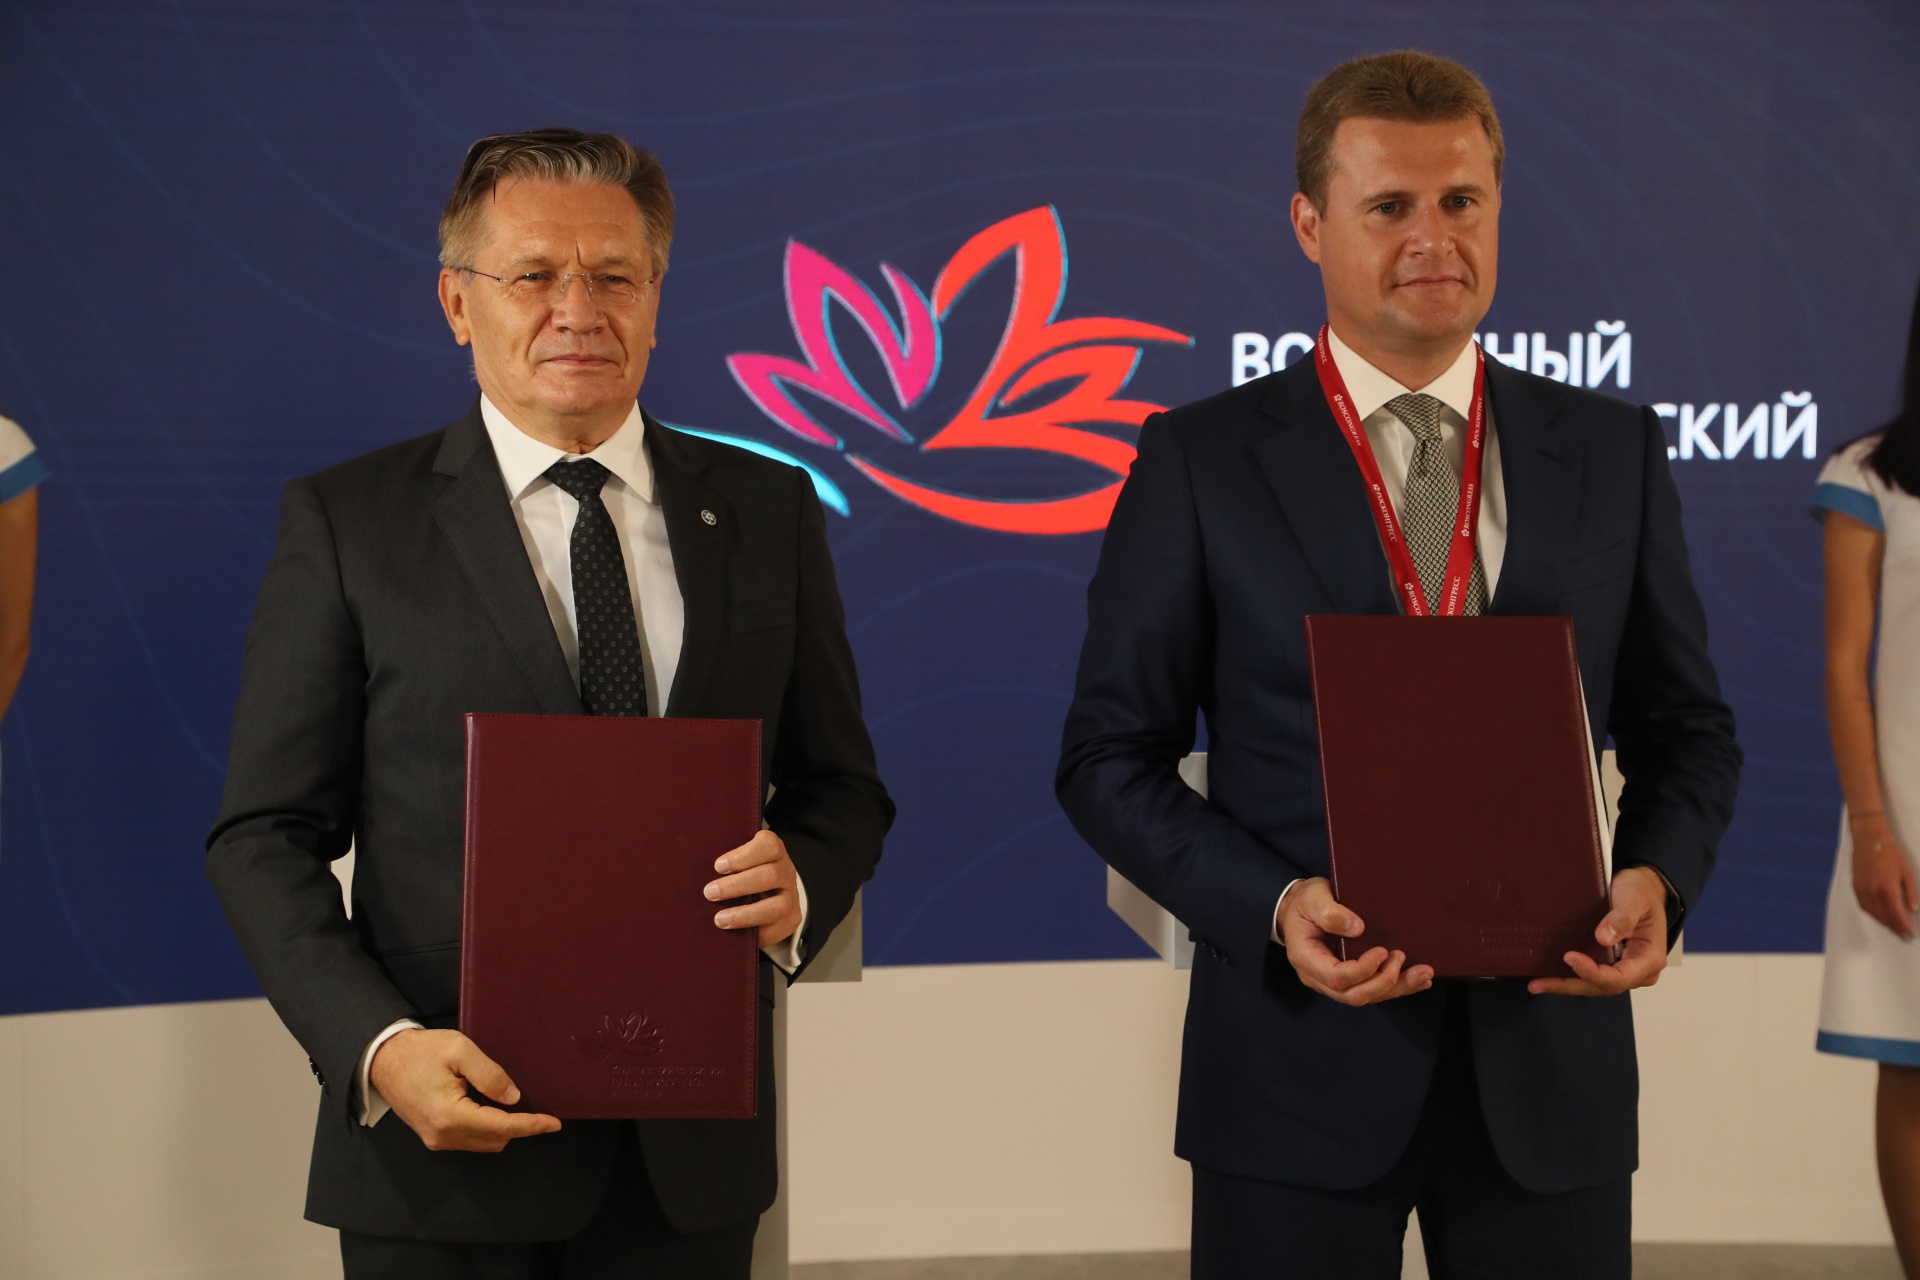 Rosatom and Russia’s Far East and Arctic Development Ministry sign cooperation agreement on development of Great Northern Sea Route